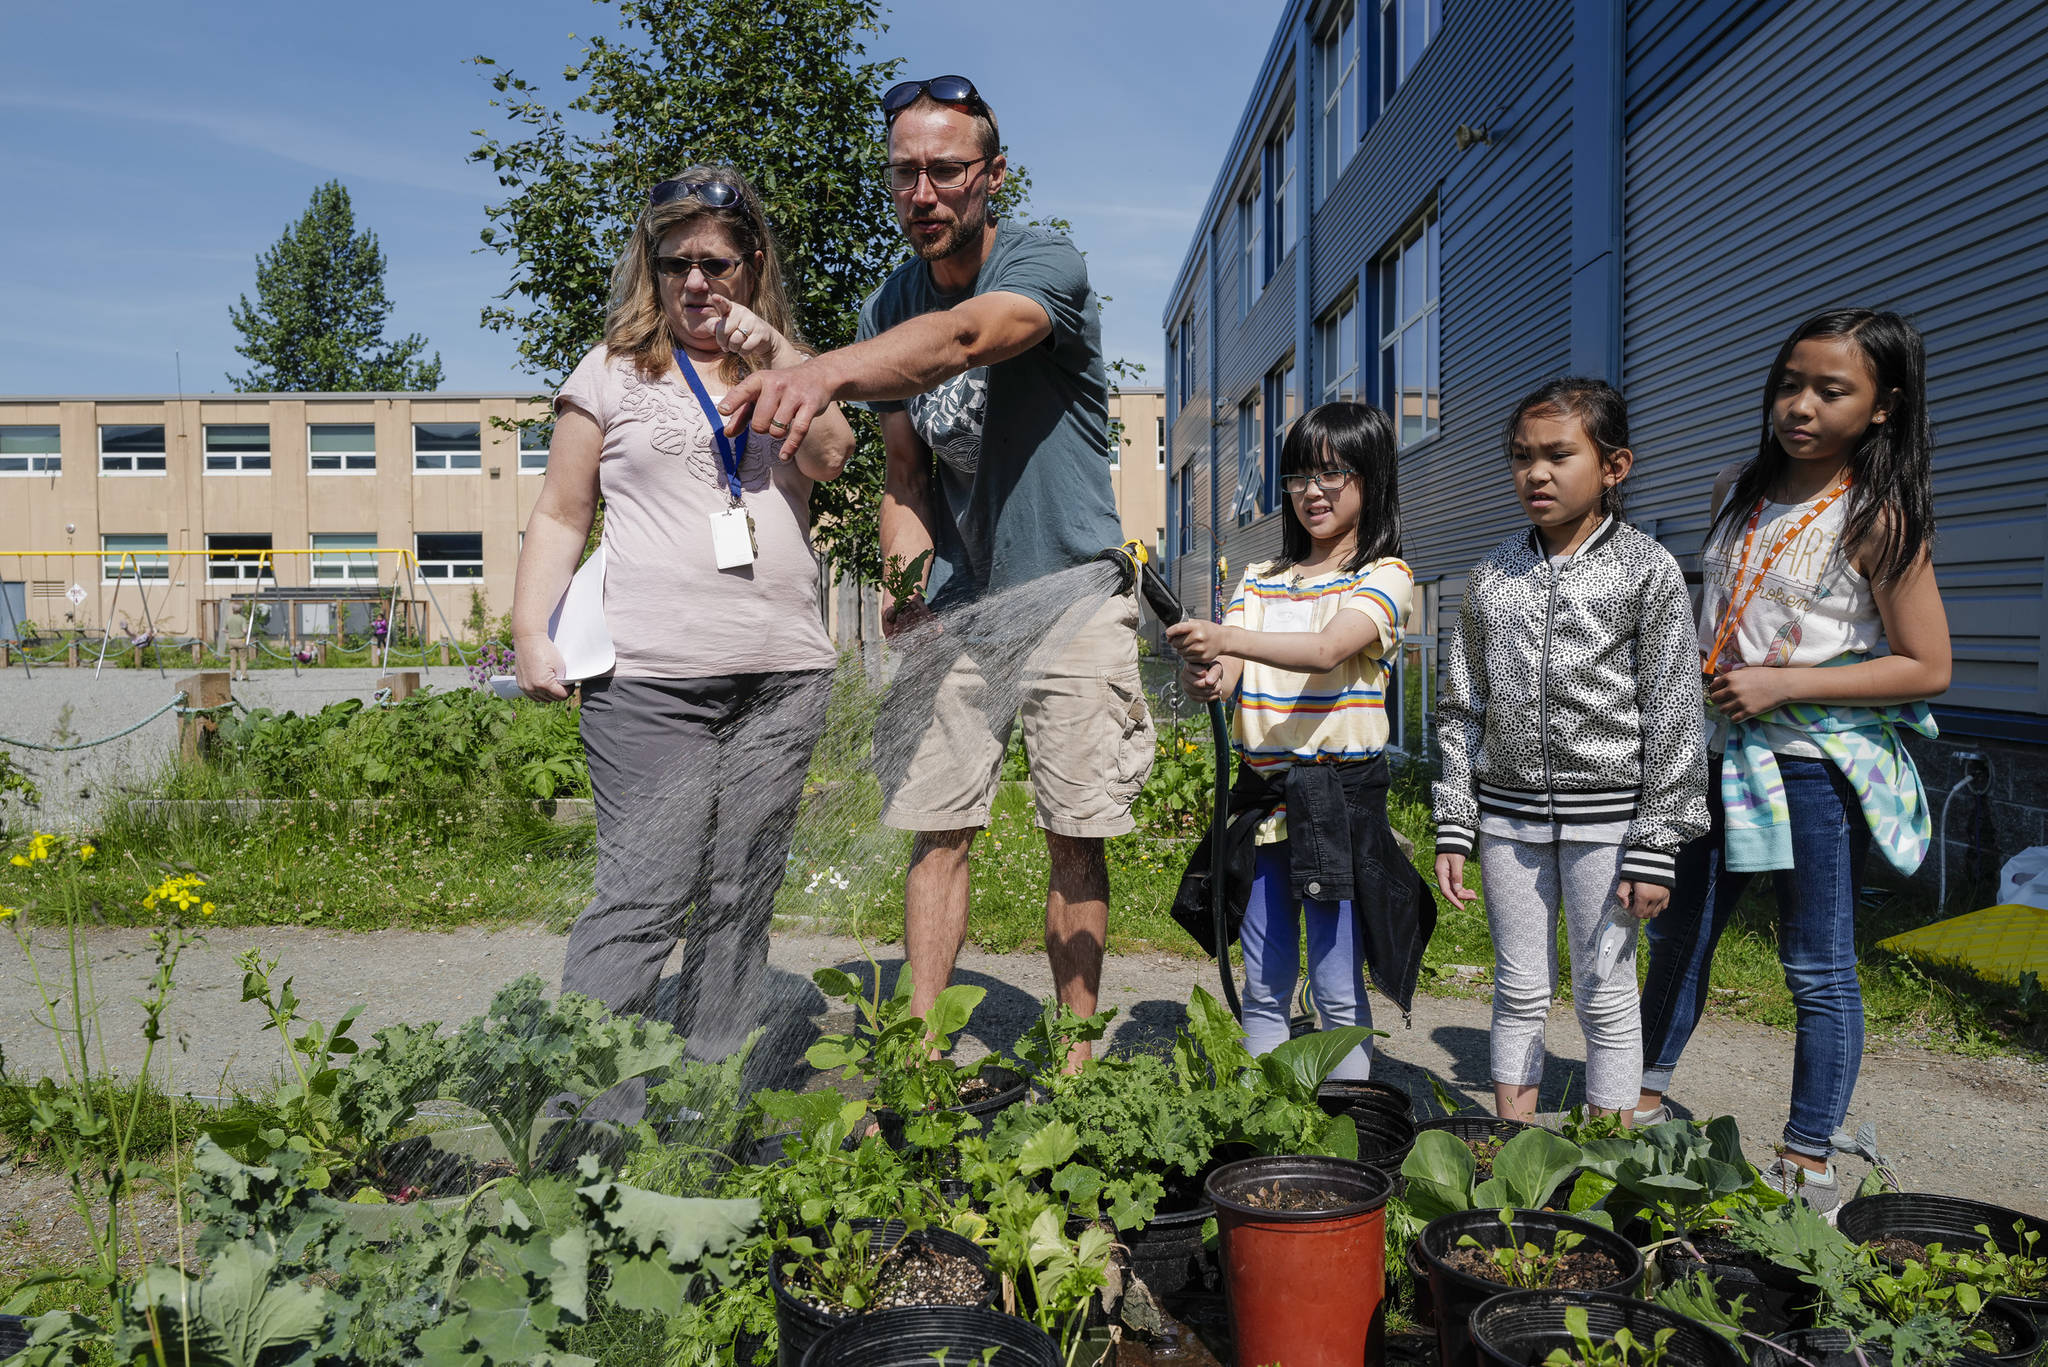 Master gardener Joel Bos points out plants to Julie Leary, Harborview Connect! program supervisor, as Elyzsa Sapinoso waters plants with Jelena Lumba Cano and Emery Marte at Harborview Elementary School on Wednesday, June 26, 2019. (Michael Penn | Juneau Empire)